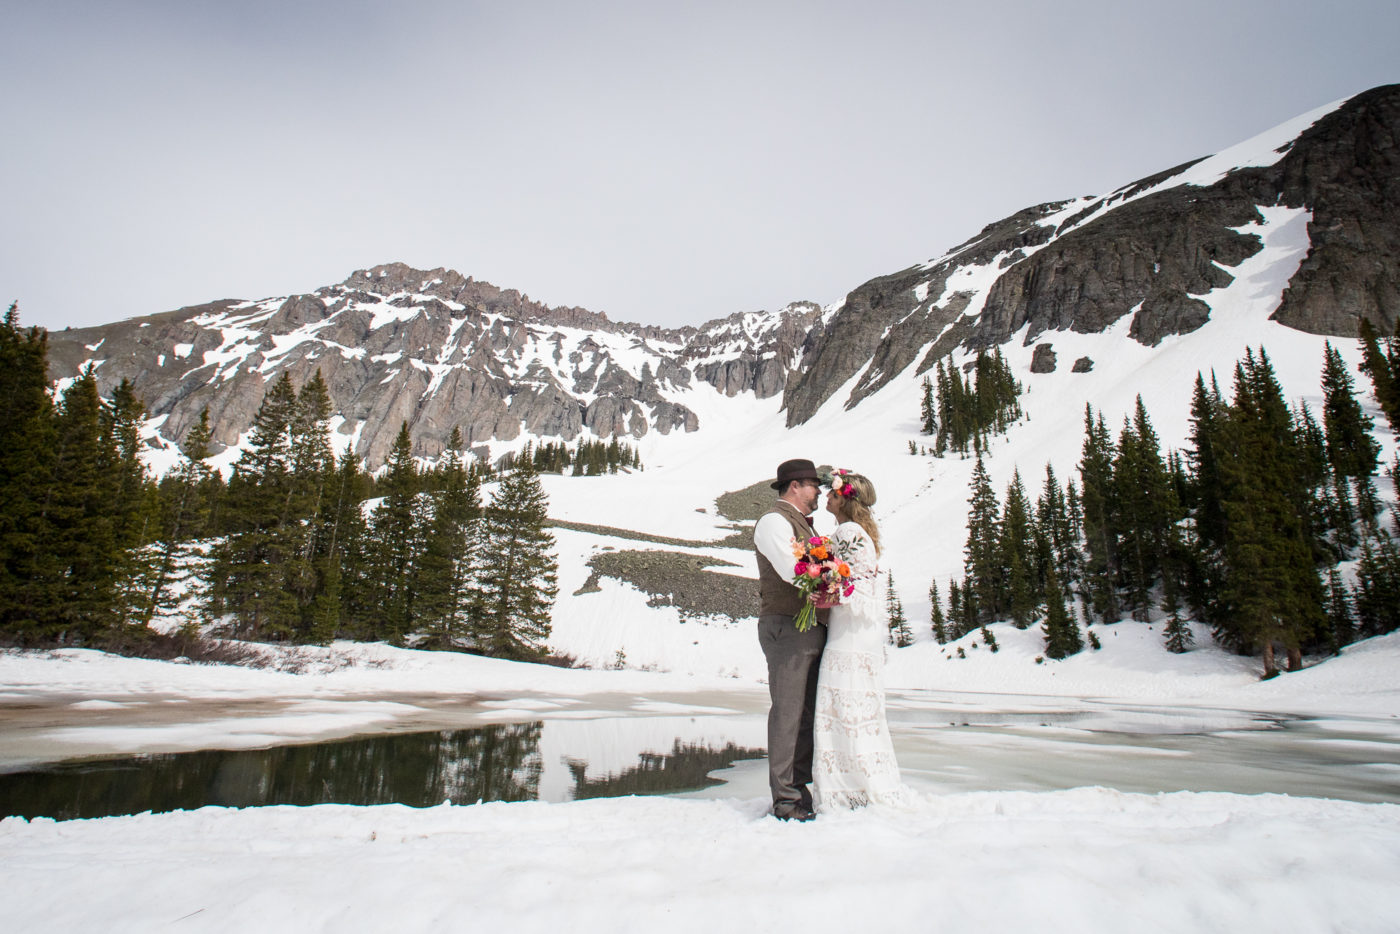 Observatory Alta Lakes elopement provides great mountain views with the frozen lake